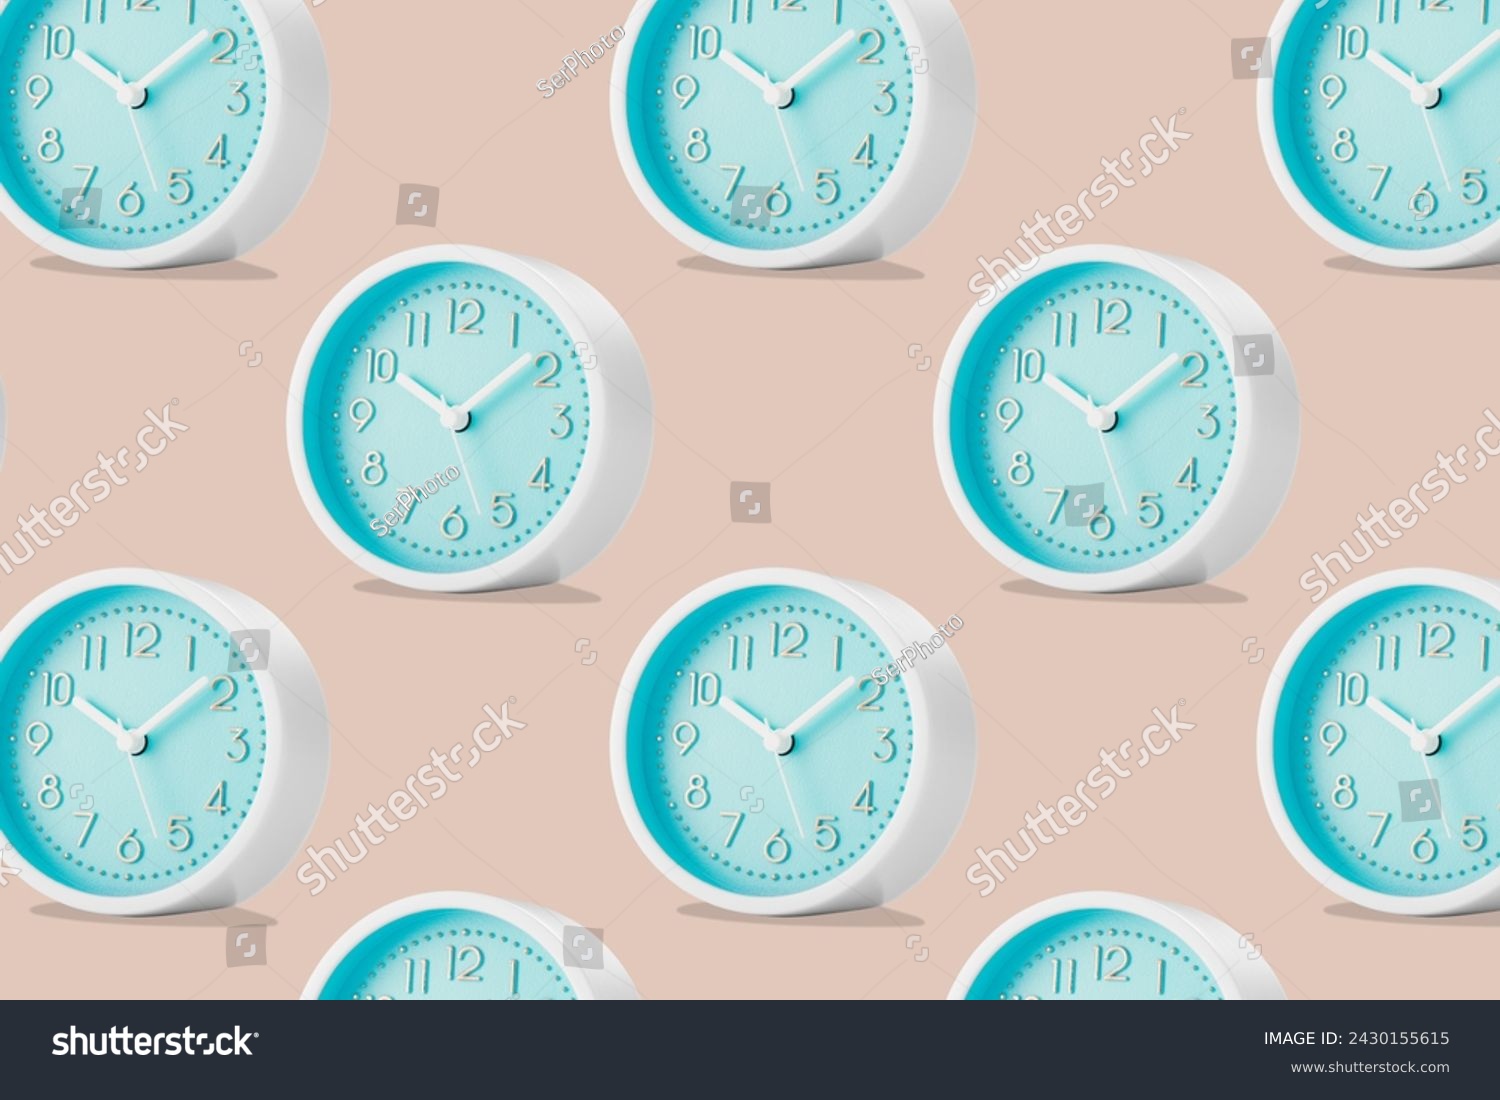 A large group of round analog table clocks with a blue dial on a beige plain background. Low angle view. #2430155615